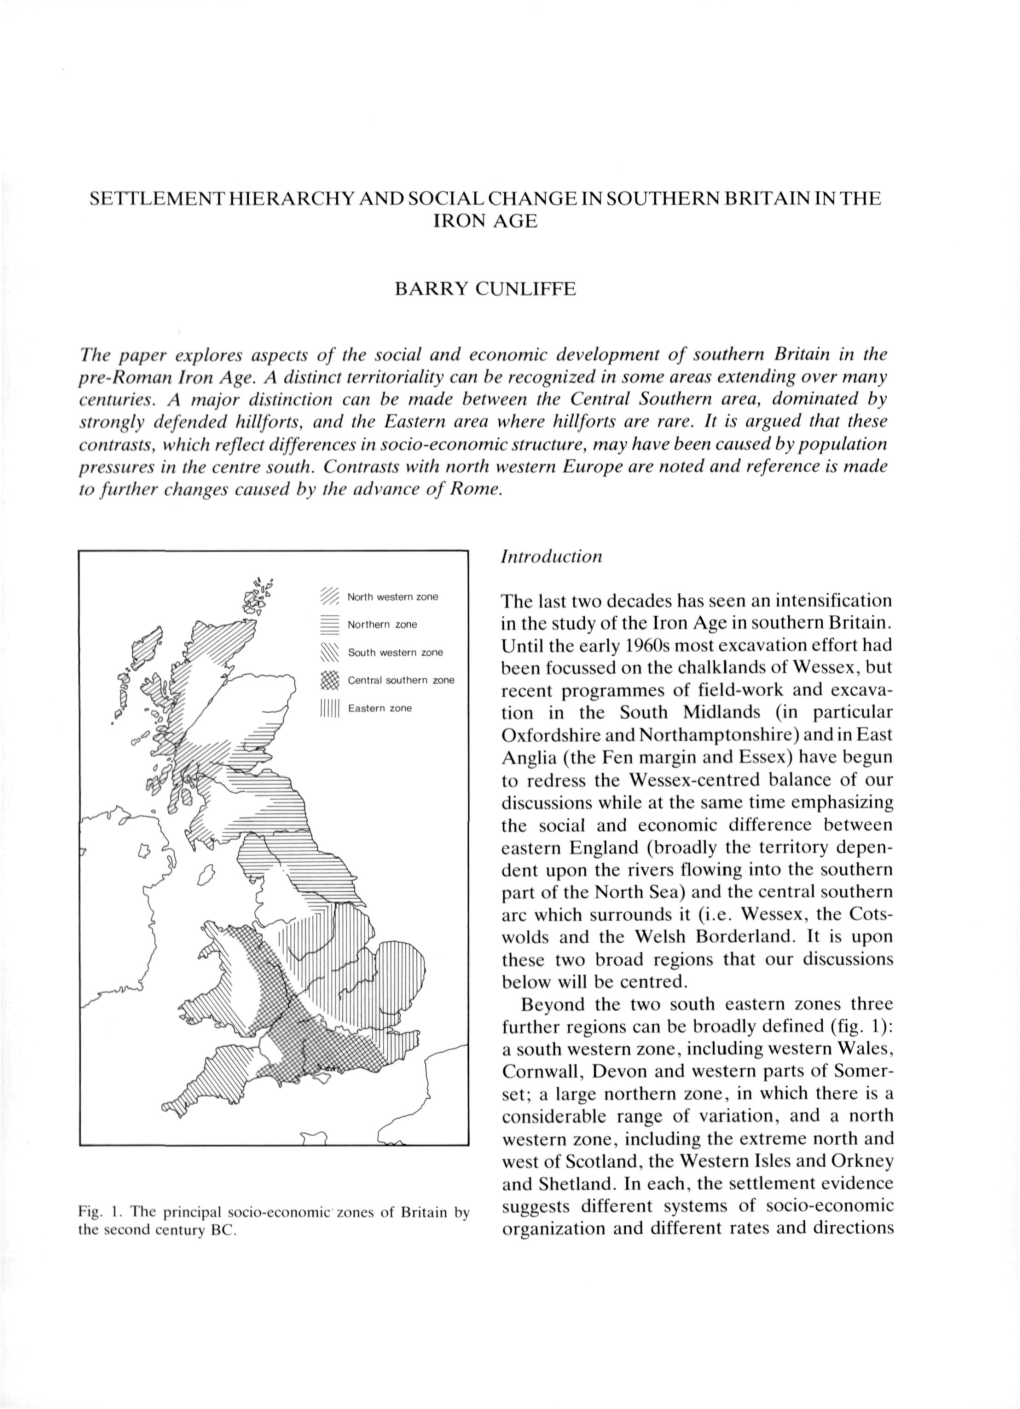 Settlement Hierarchy and Social Change in Southern Britain in the Iron Age